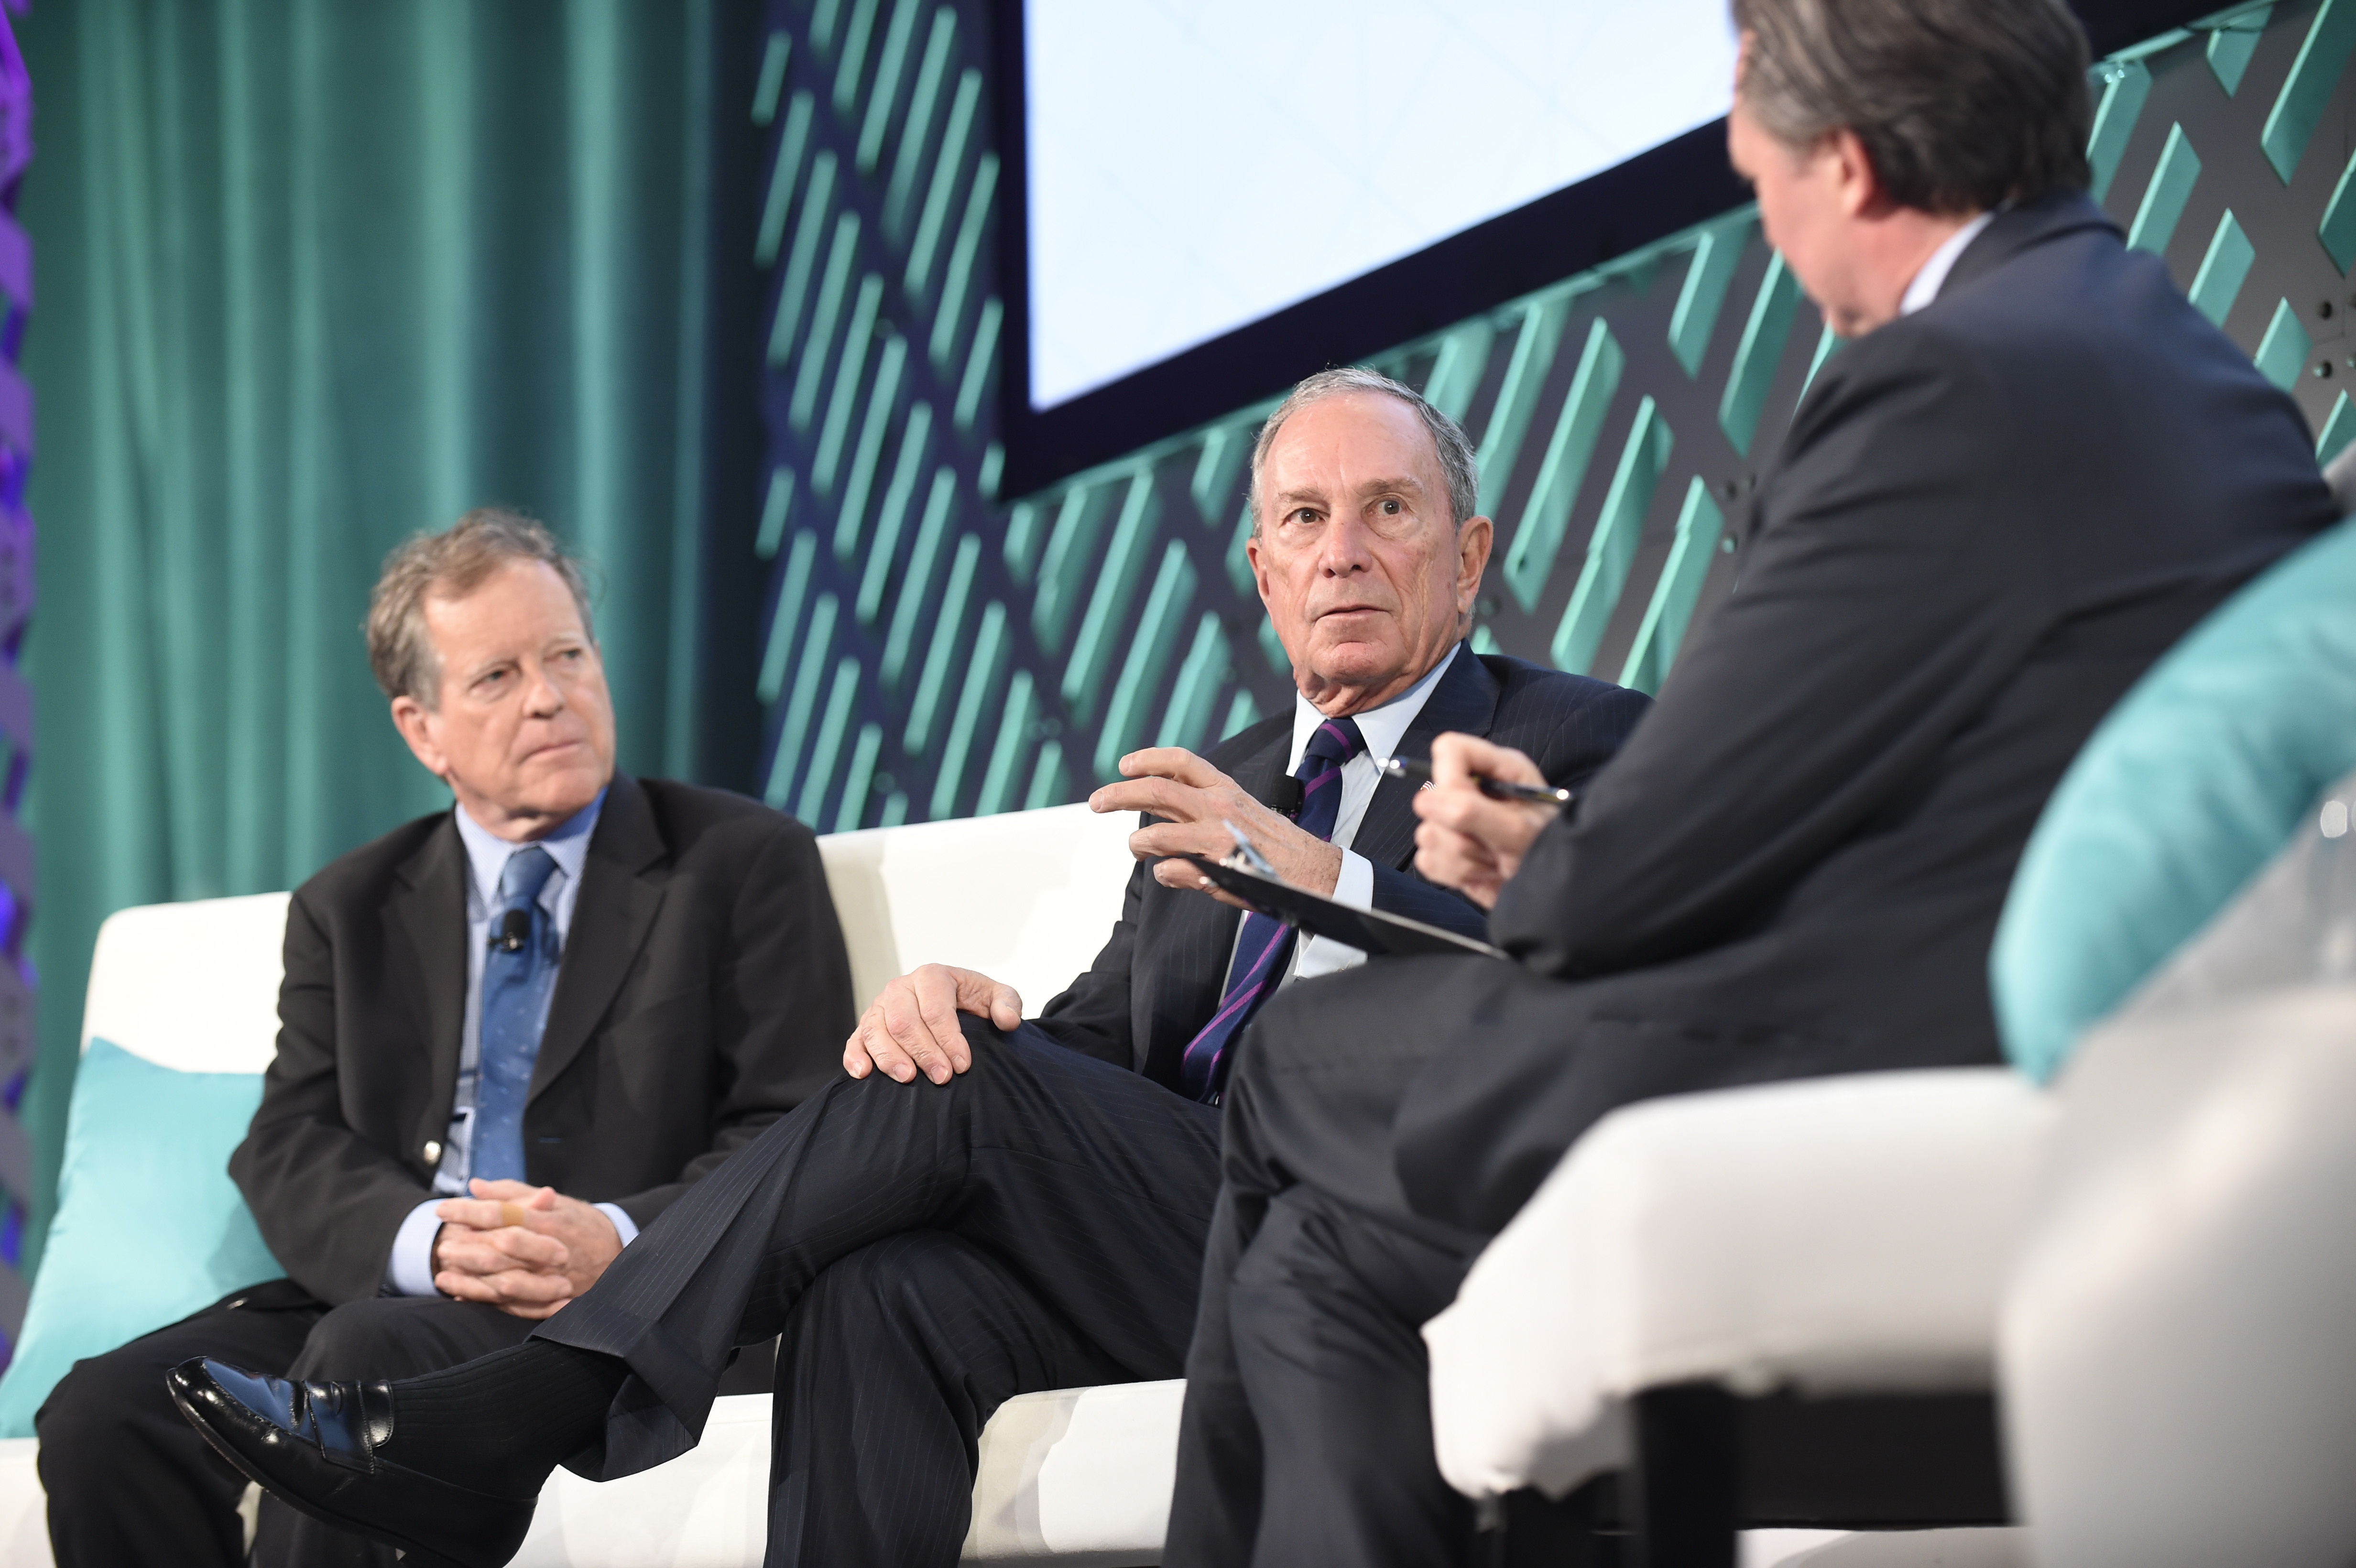 Climate Solutions Catalyze Debate at Bloomberg Summit Clean Energy